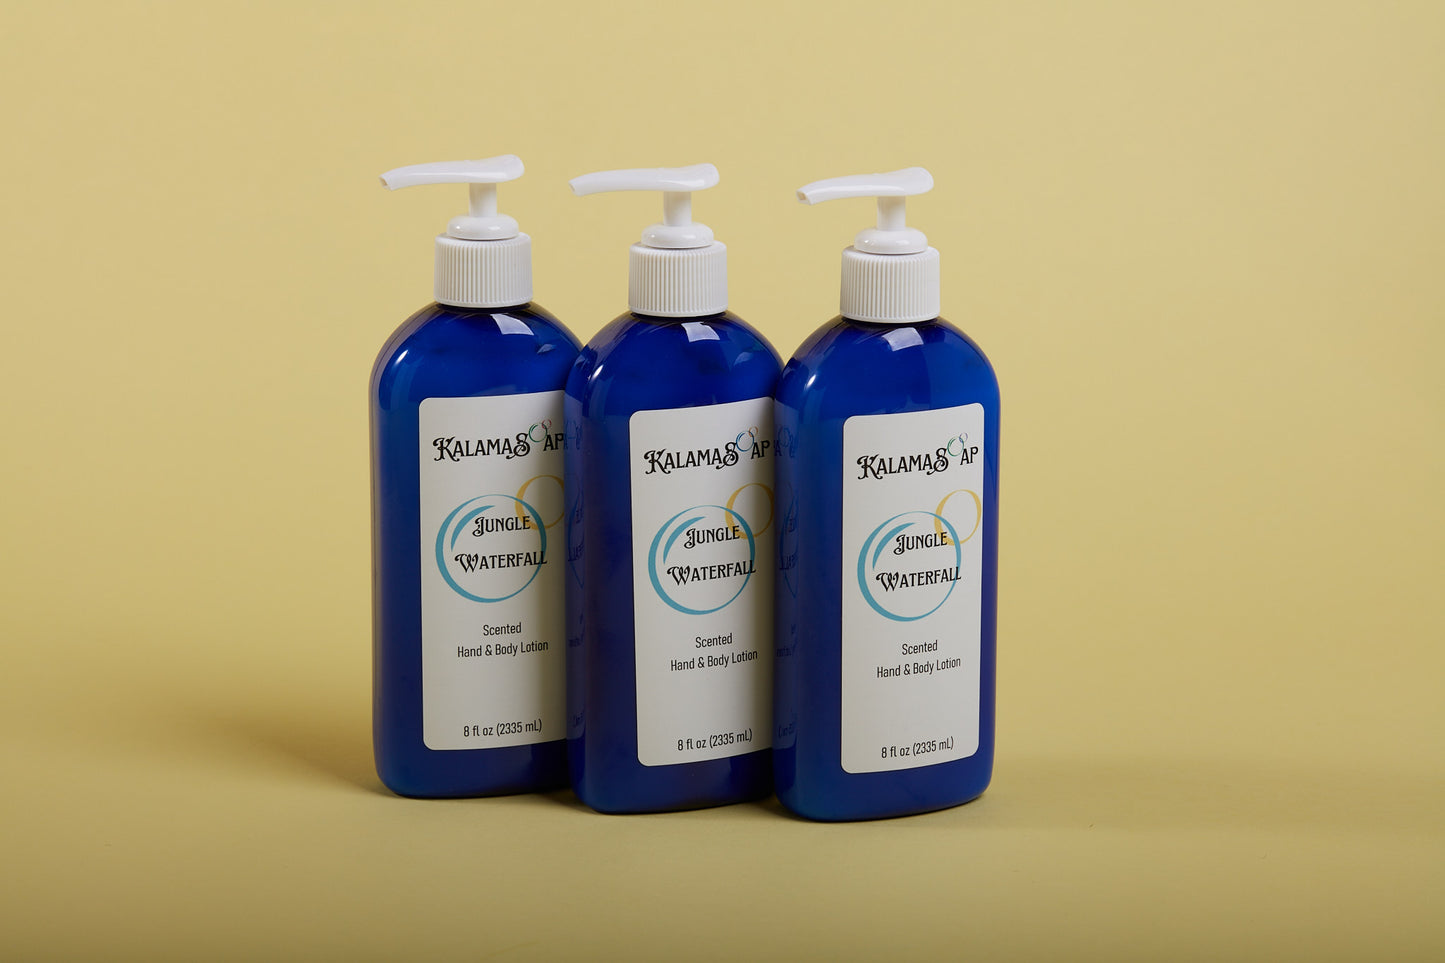 A photo of 3, 8-fluid ounce blue lotion bottles with white pumps on a yellow background labelend KalamaSoap Jungle Waterfall Scented Hand & Body Lotion 